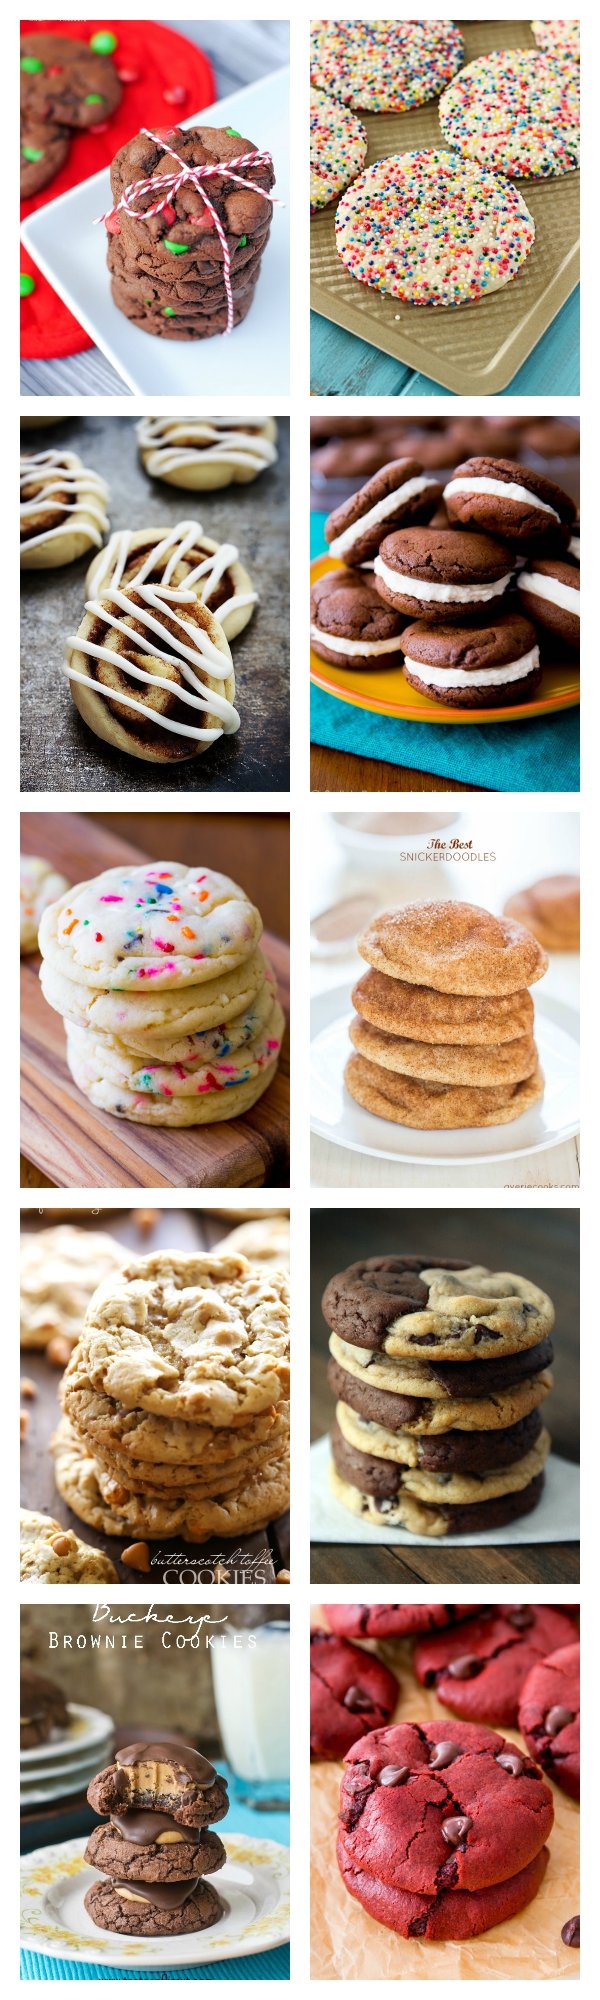 CookieCollage4